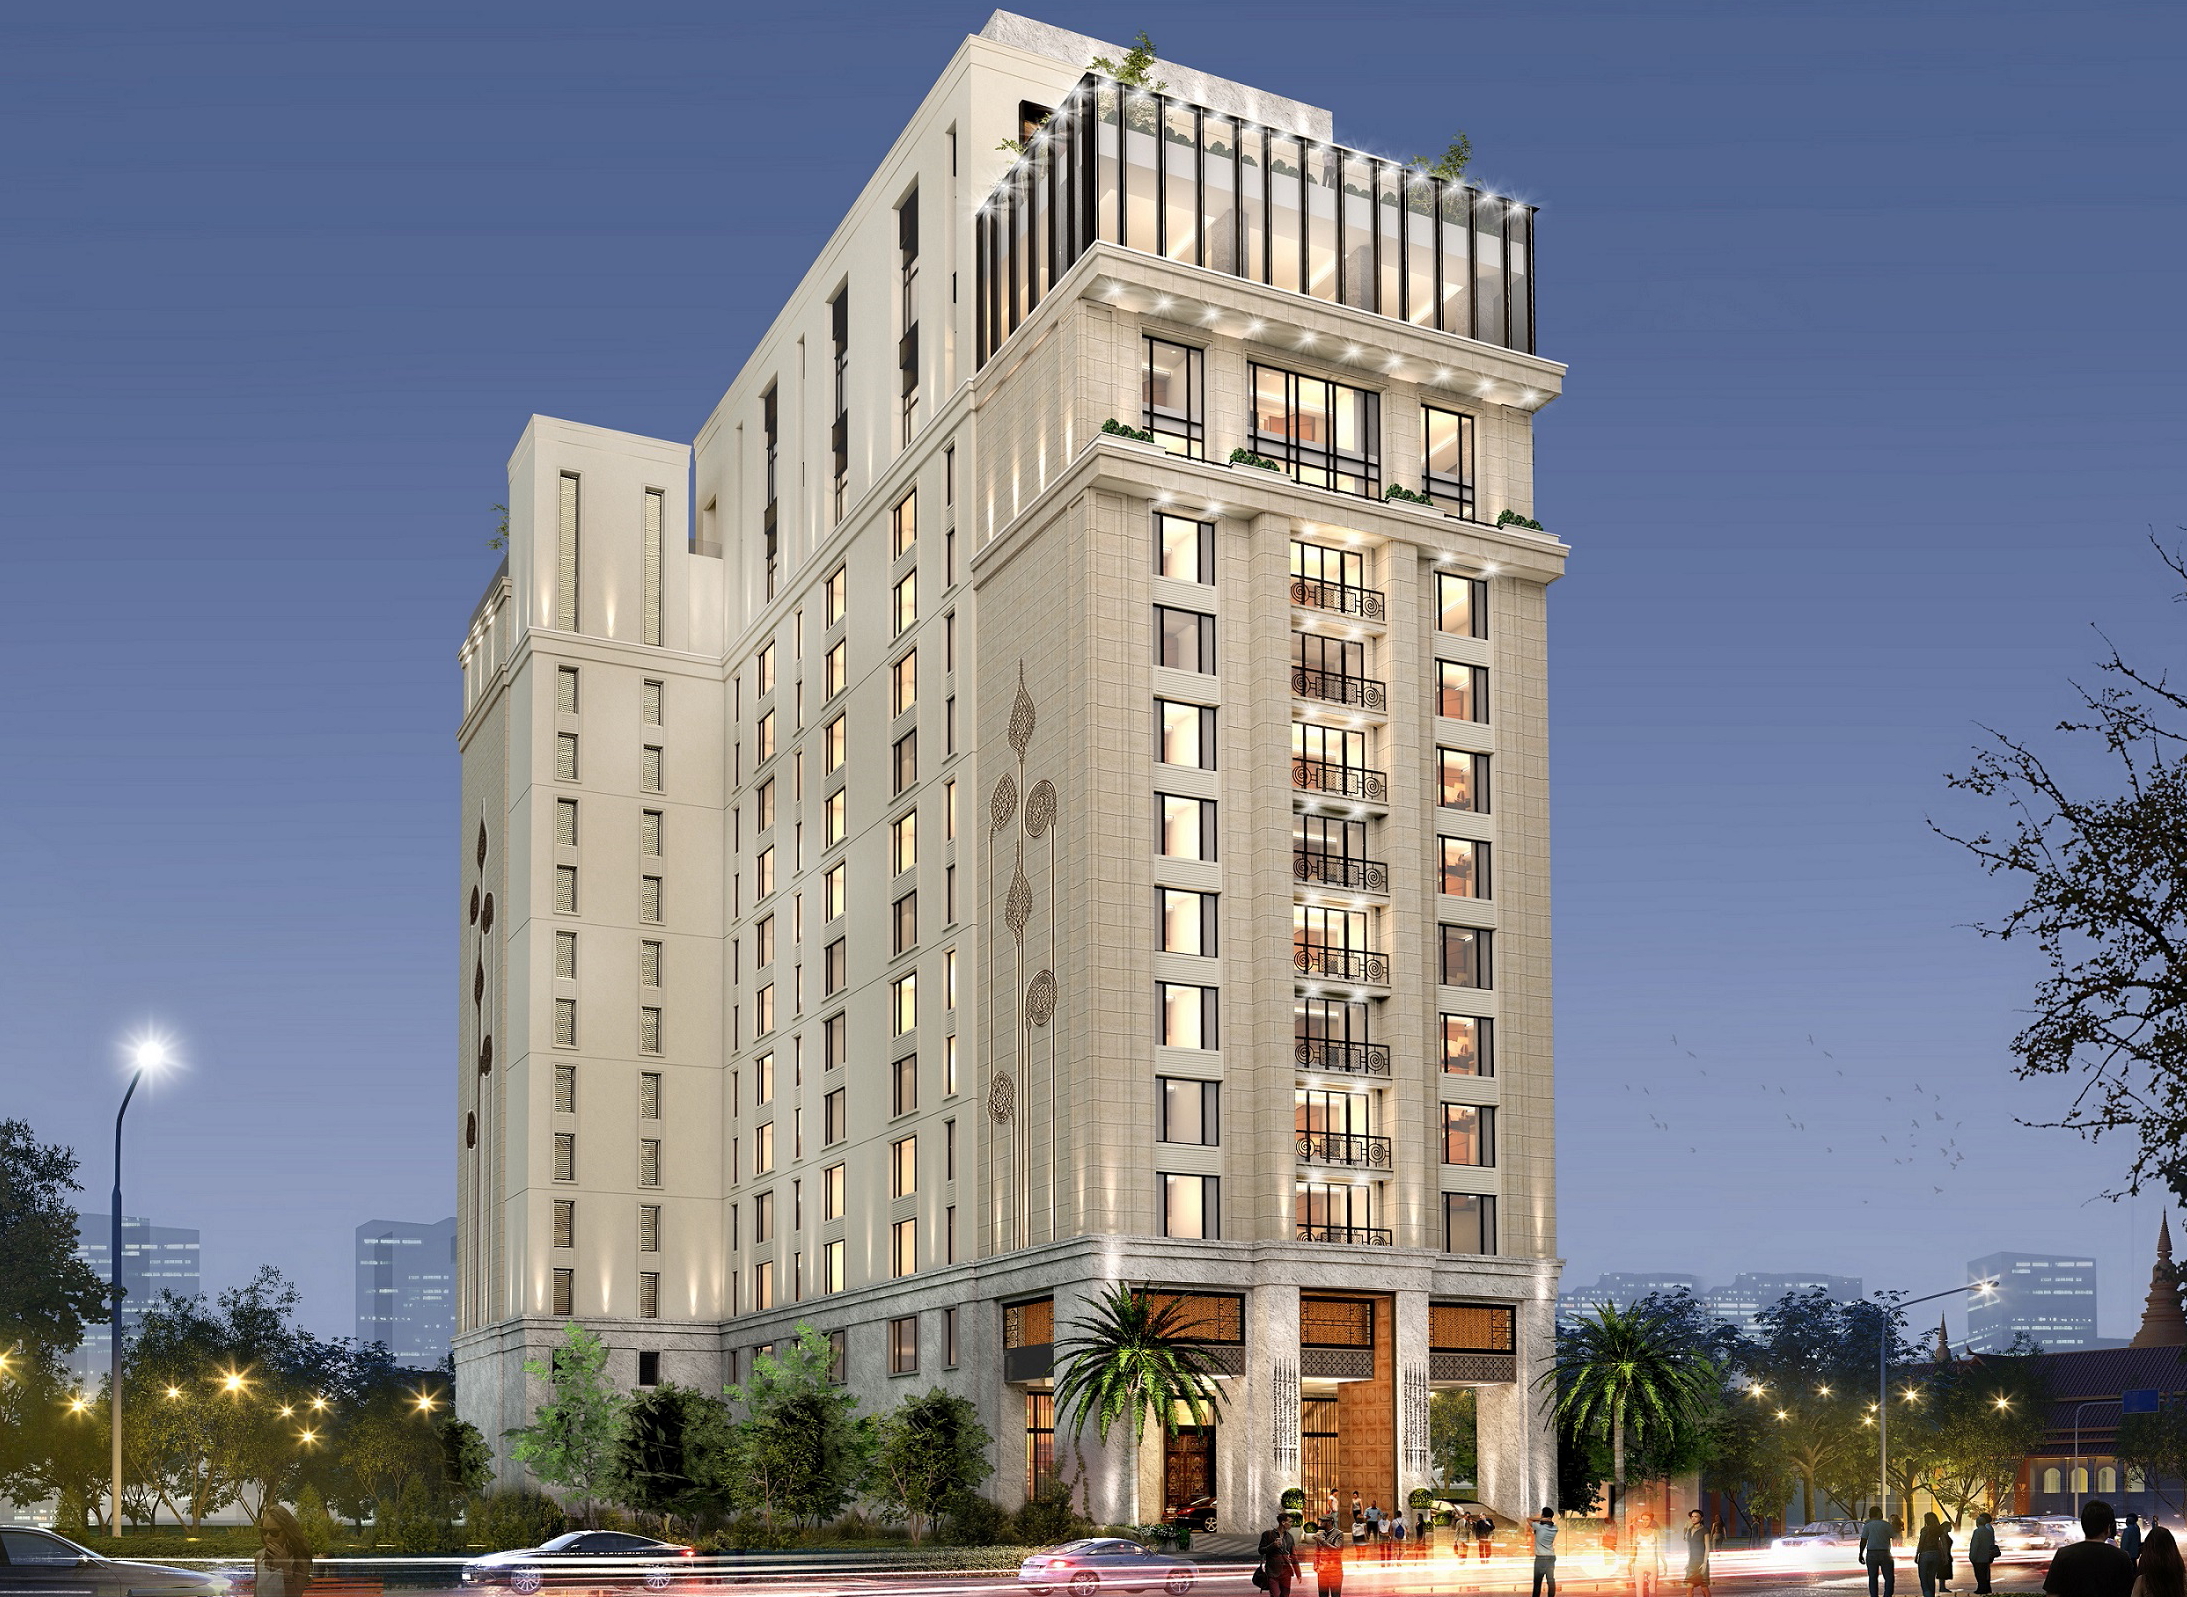 Marriott has expanded its Autograph Collection of Hotels to Cambodia with the signing of The Khom Hotel in Phnom Penh. Scheduled to open in early 2022, The Khom Hotel will offer 130 guest rooms and suites. Click to enlarge.